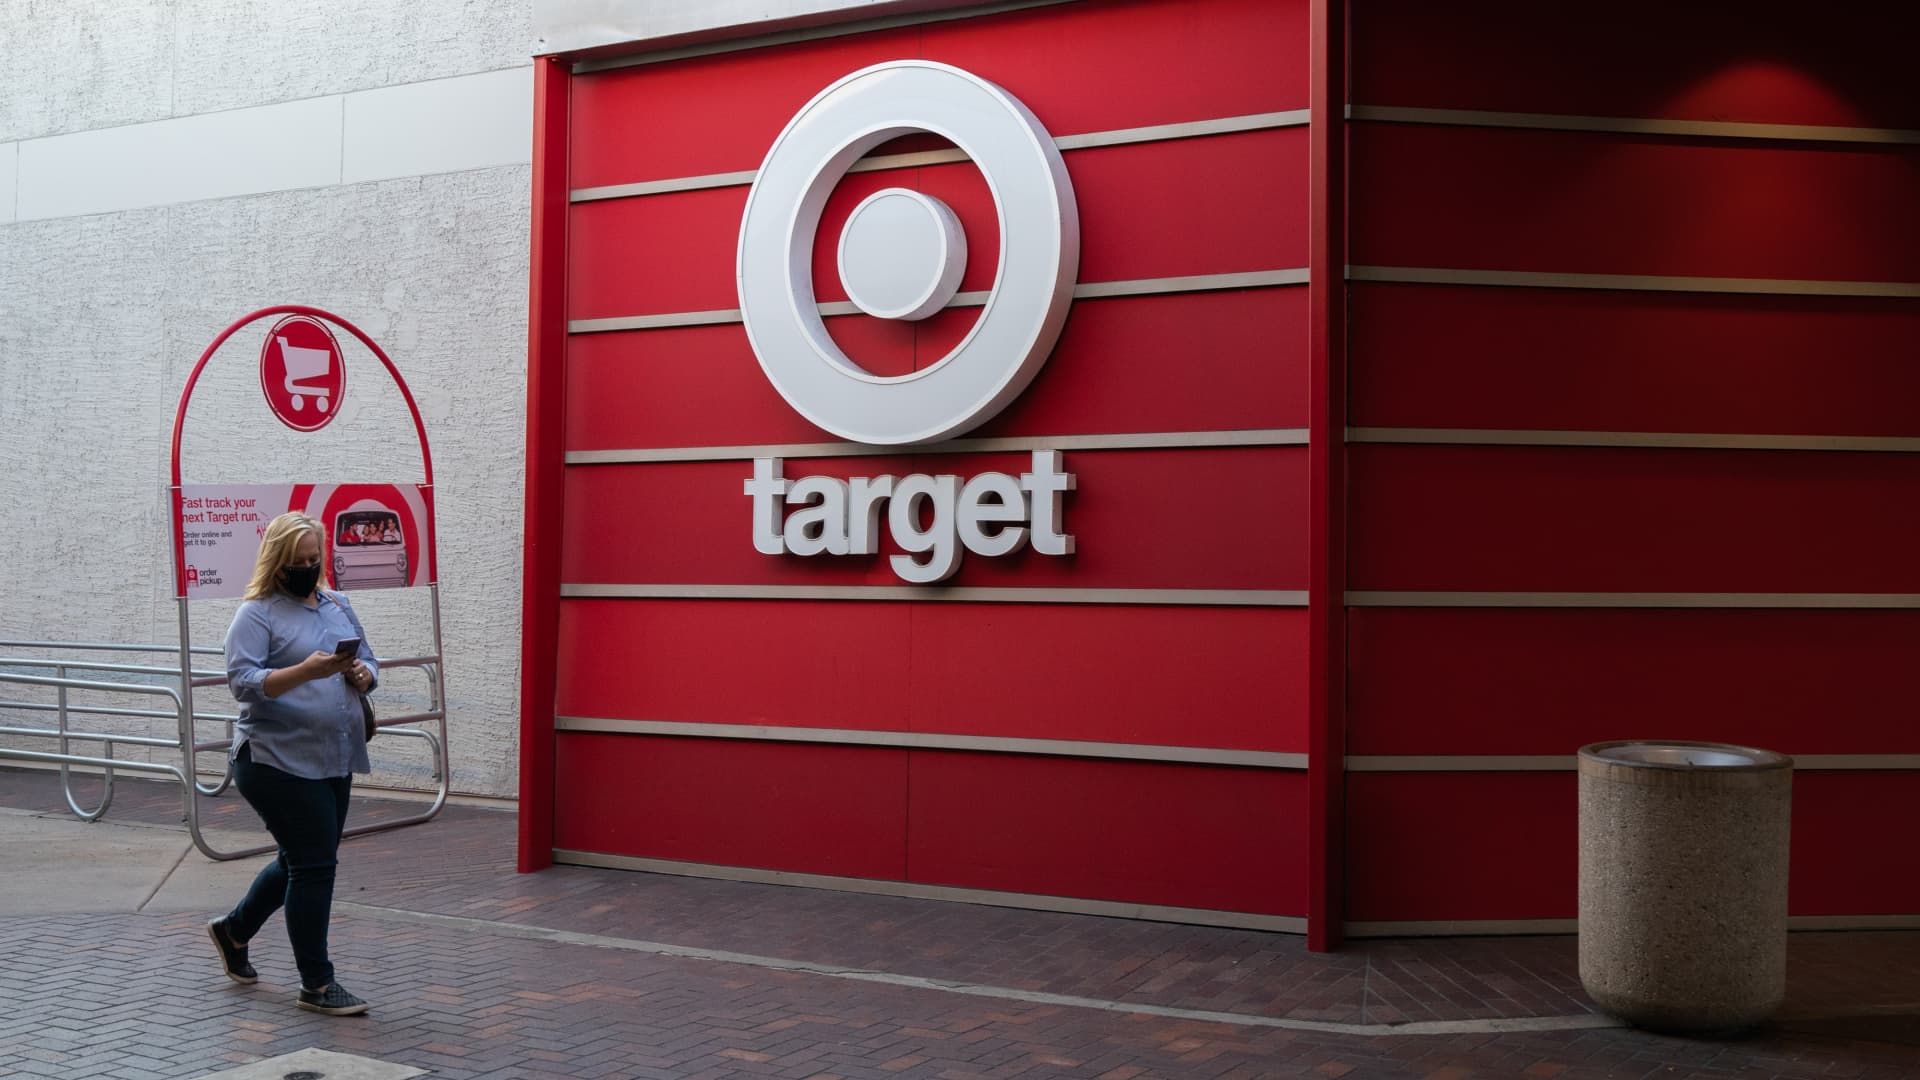 A person wearing a protective mask walks past a Target Corp. store at the Grossmont Center Mall in La Mesa, California, U.S., on Thursday, Feb. 11, 2021.